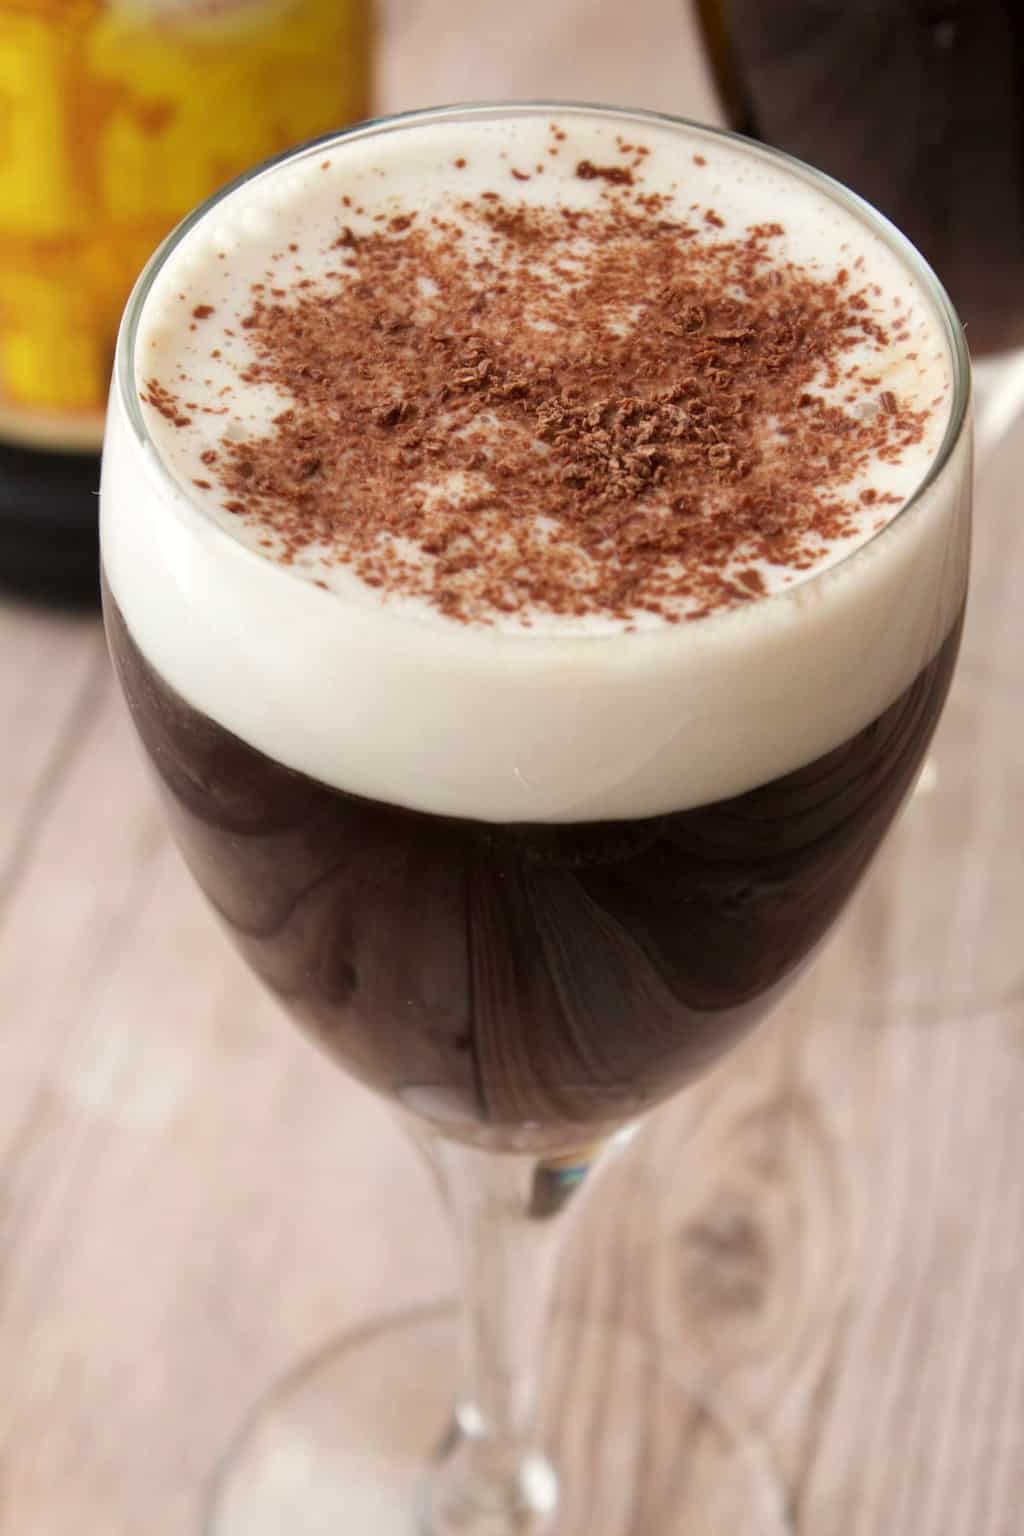 Kahlua coffee in wine glasses topped with vegan whipped cream and chocolate shavings. 